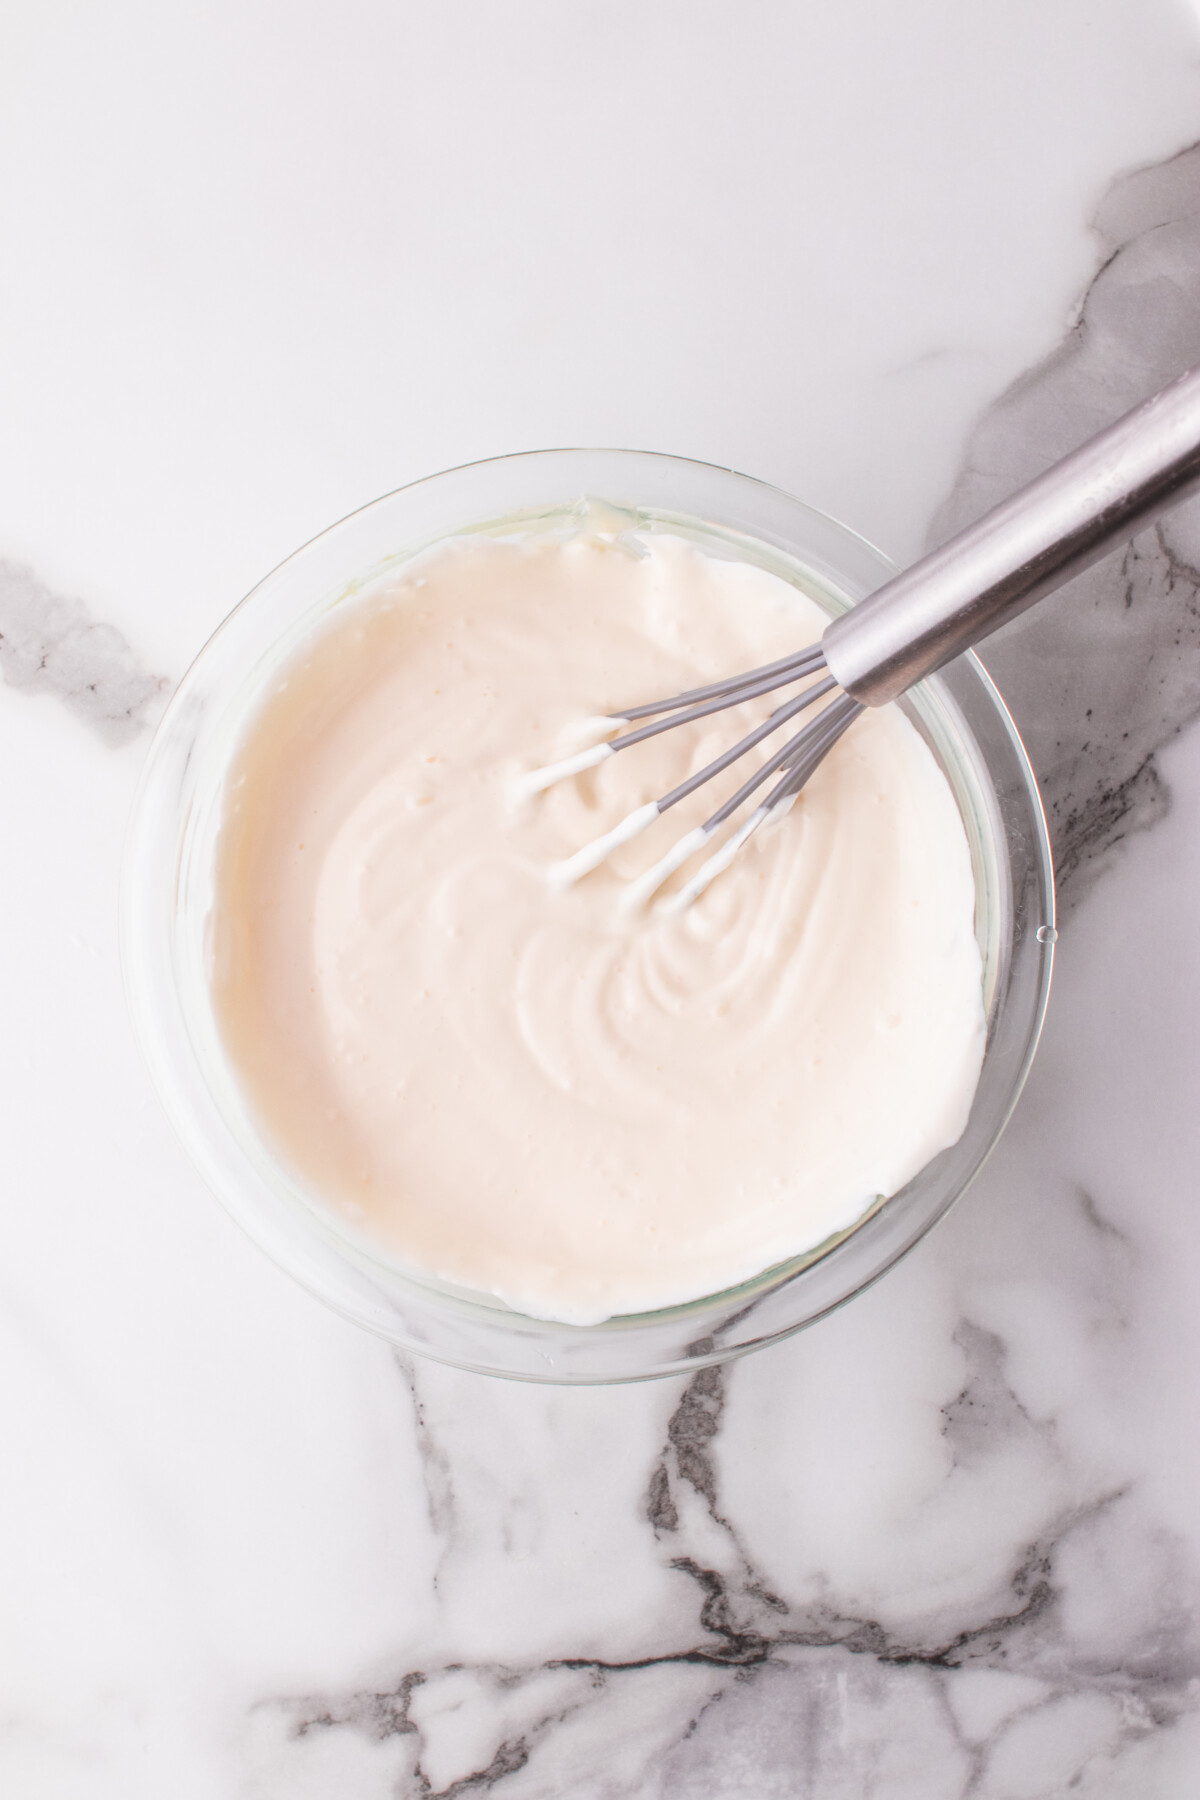 Mayo and sour cream whisked together in a bowl.